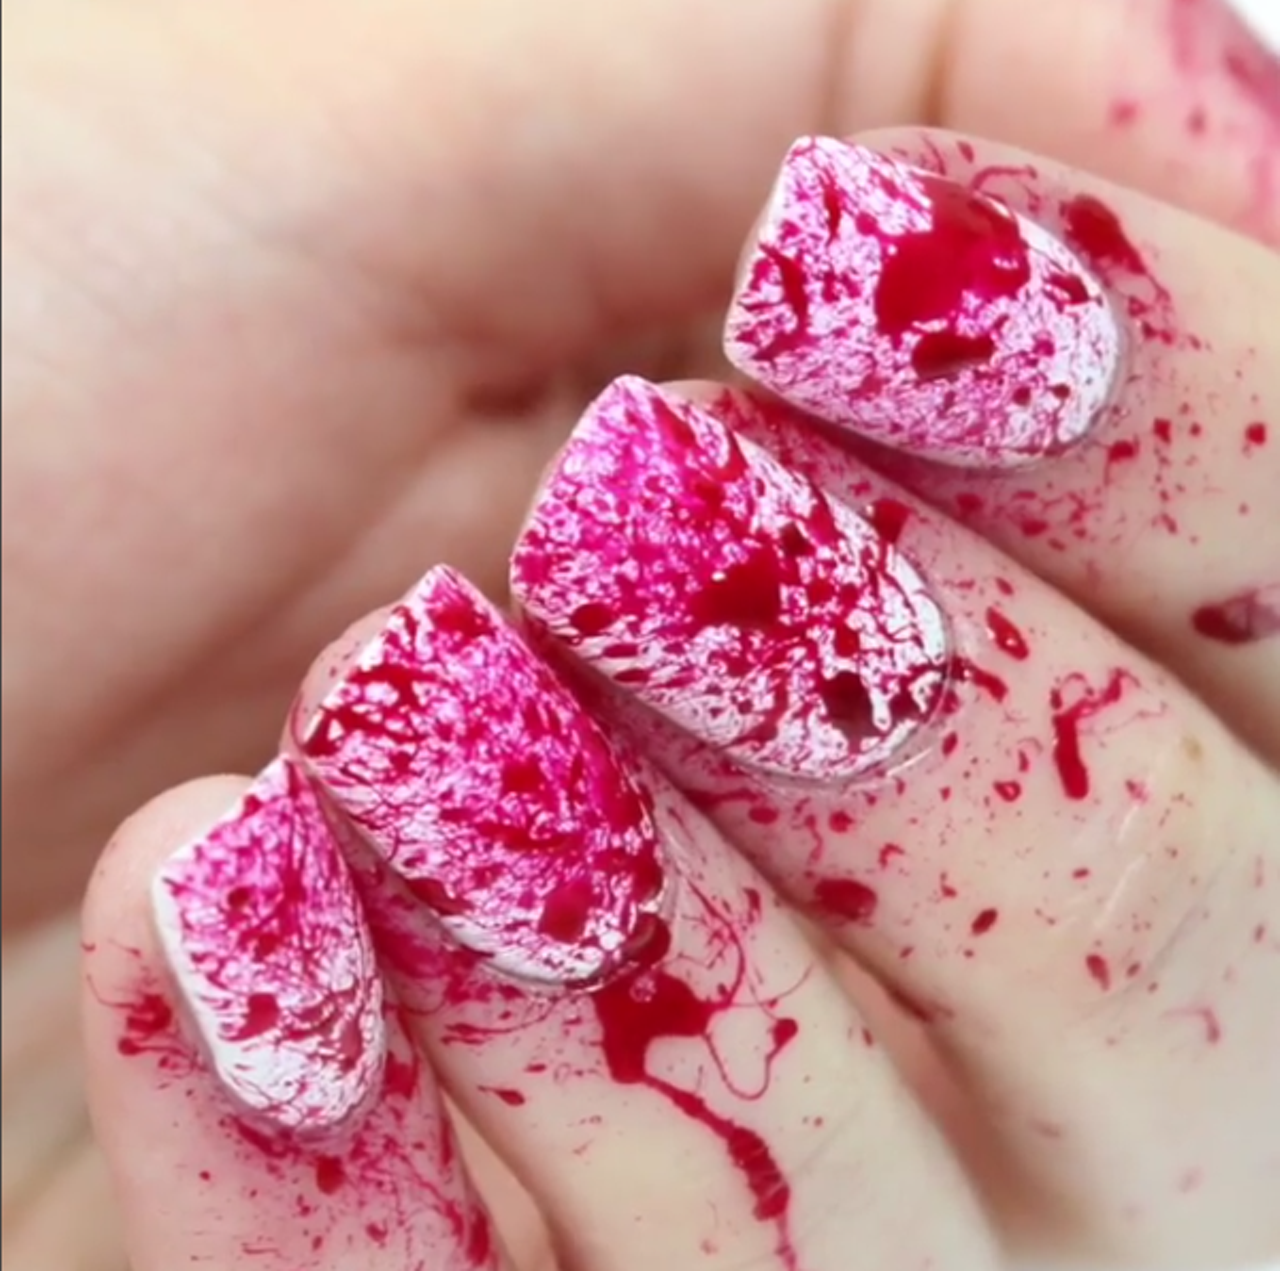 Blood spattered by@thenailtrail